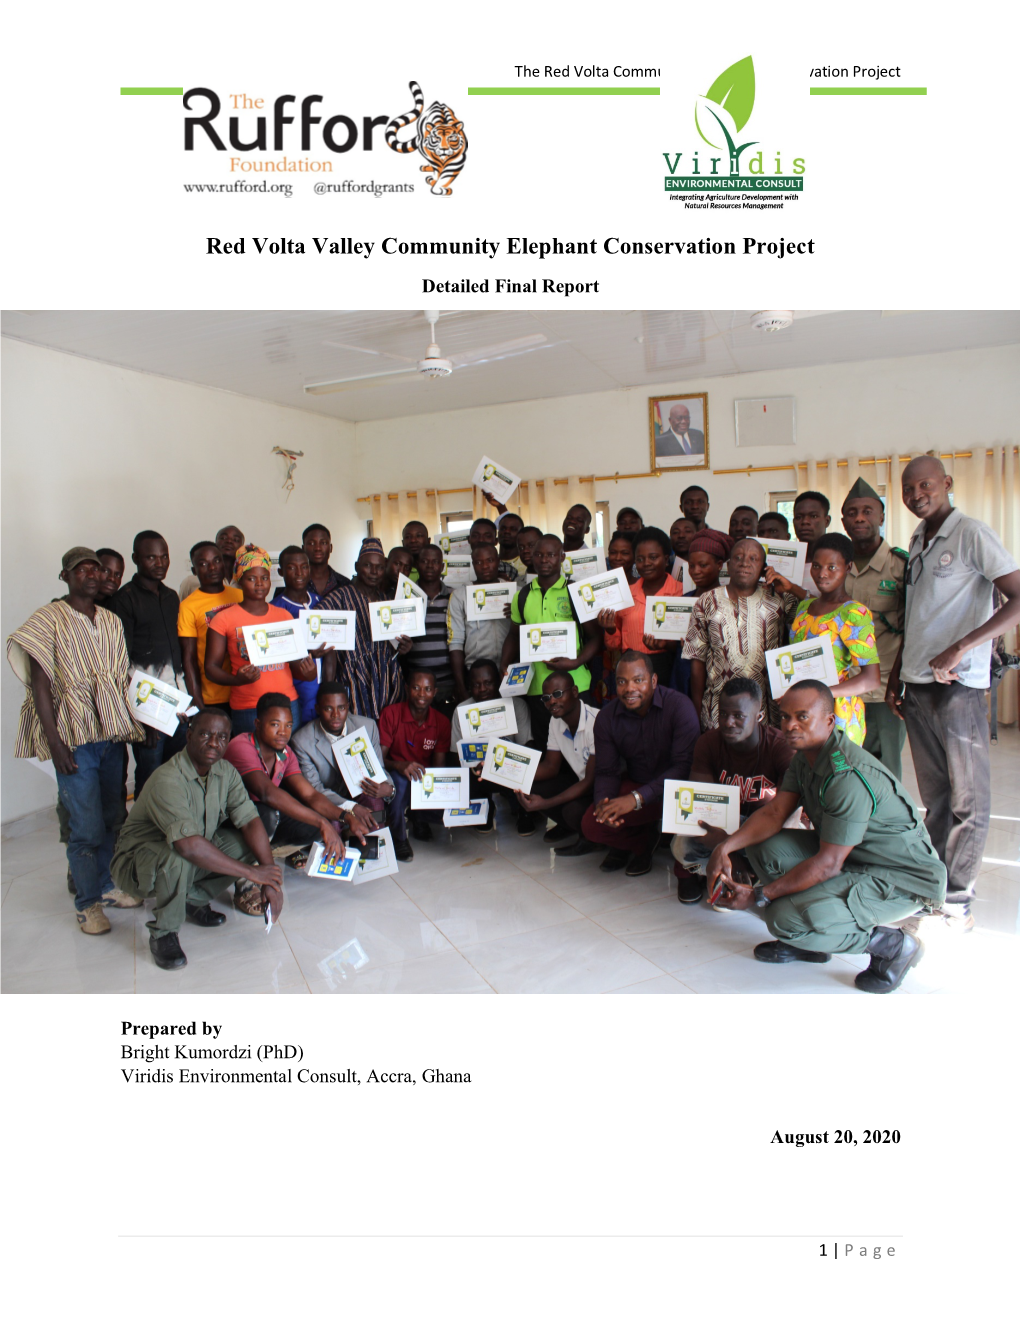 Red Volta Valley Community Elephant Conservation Project Detailed Final Report